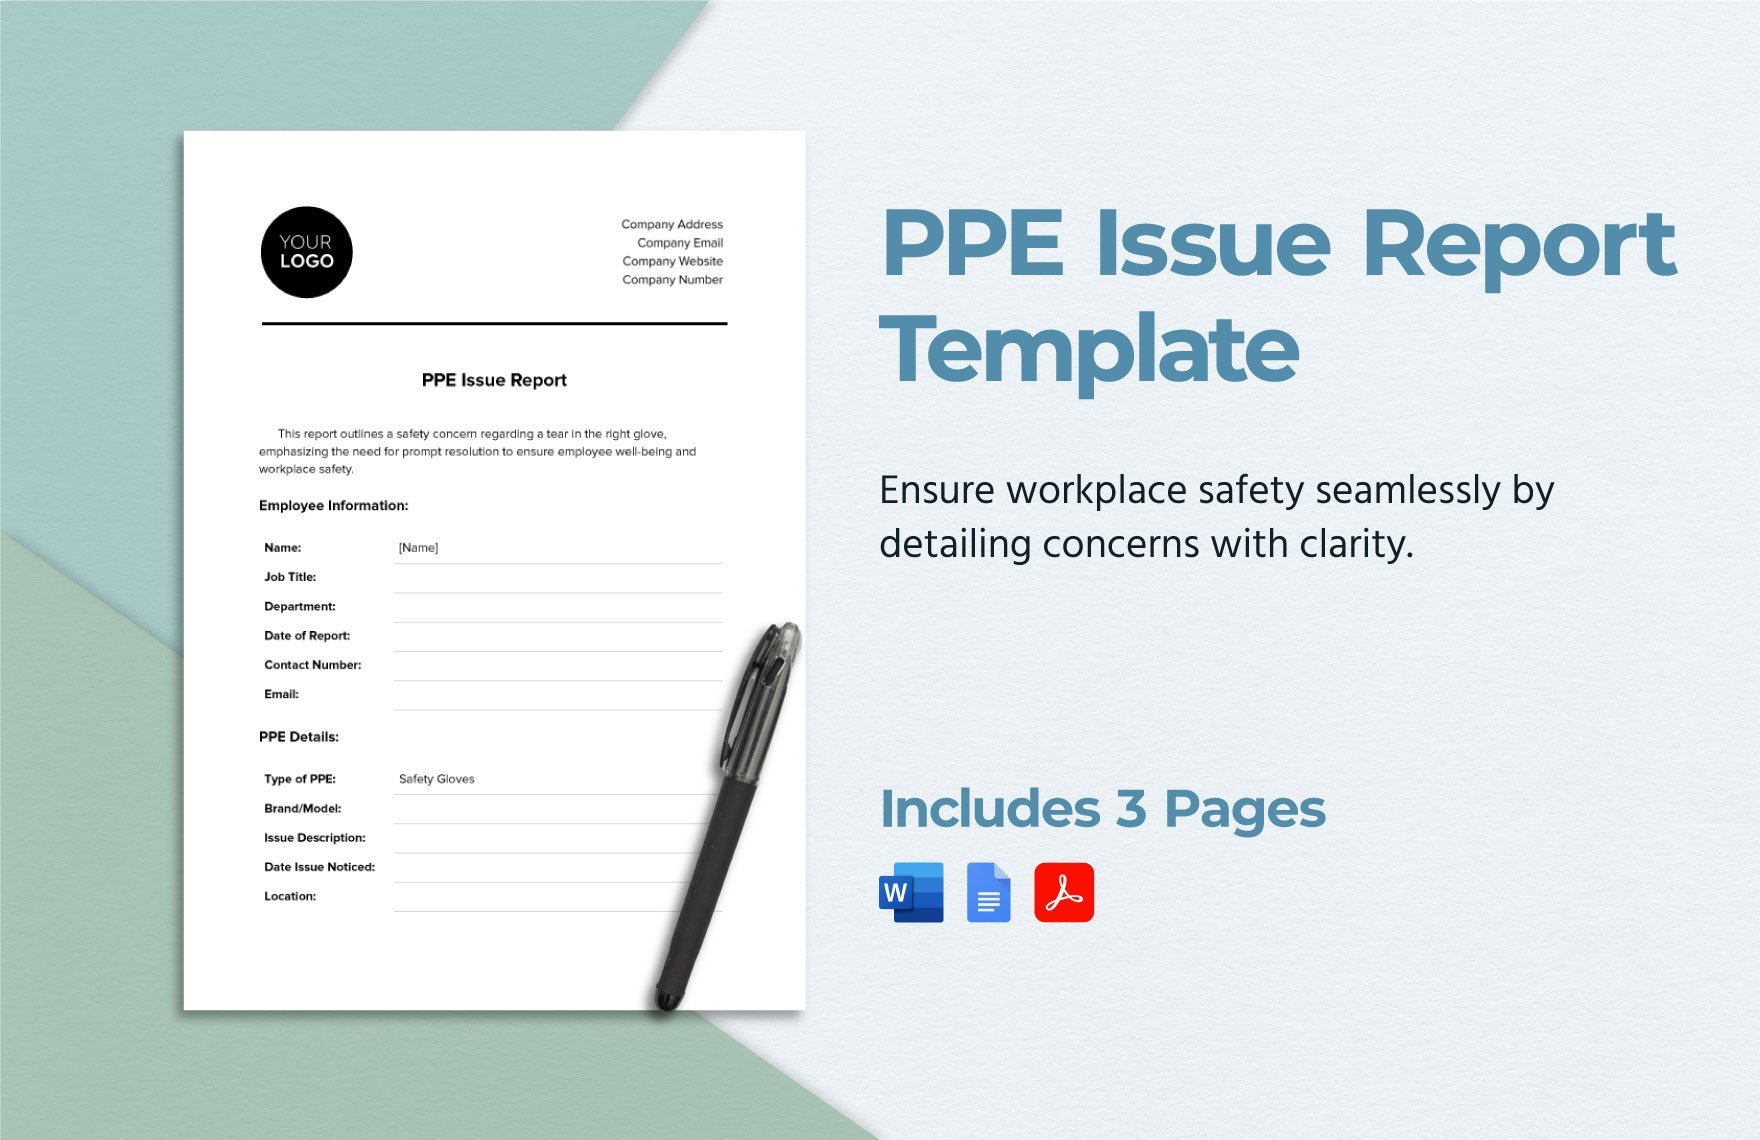 PPE Issue Report Template